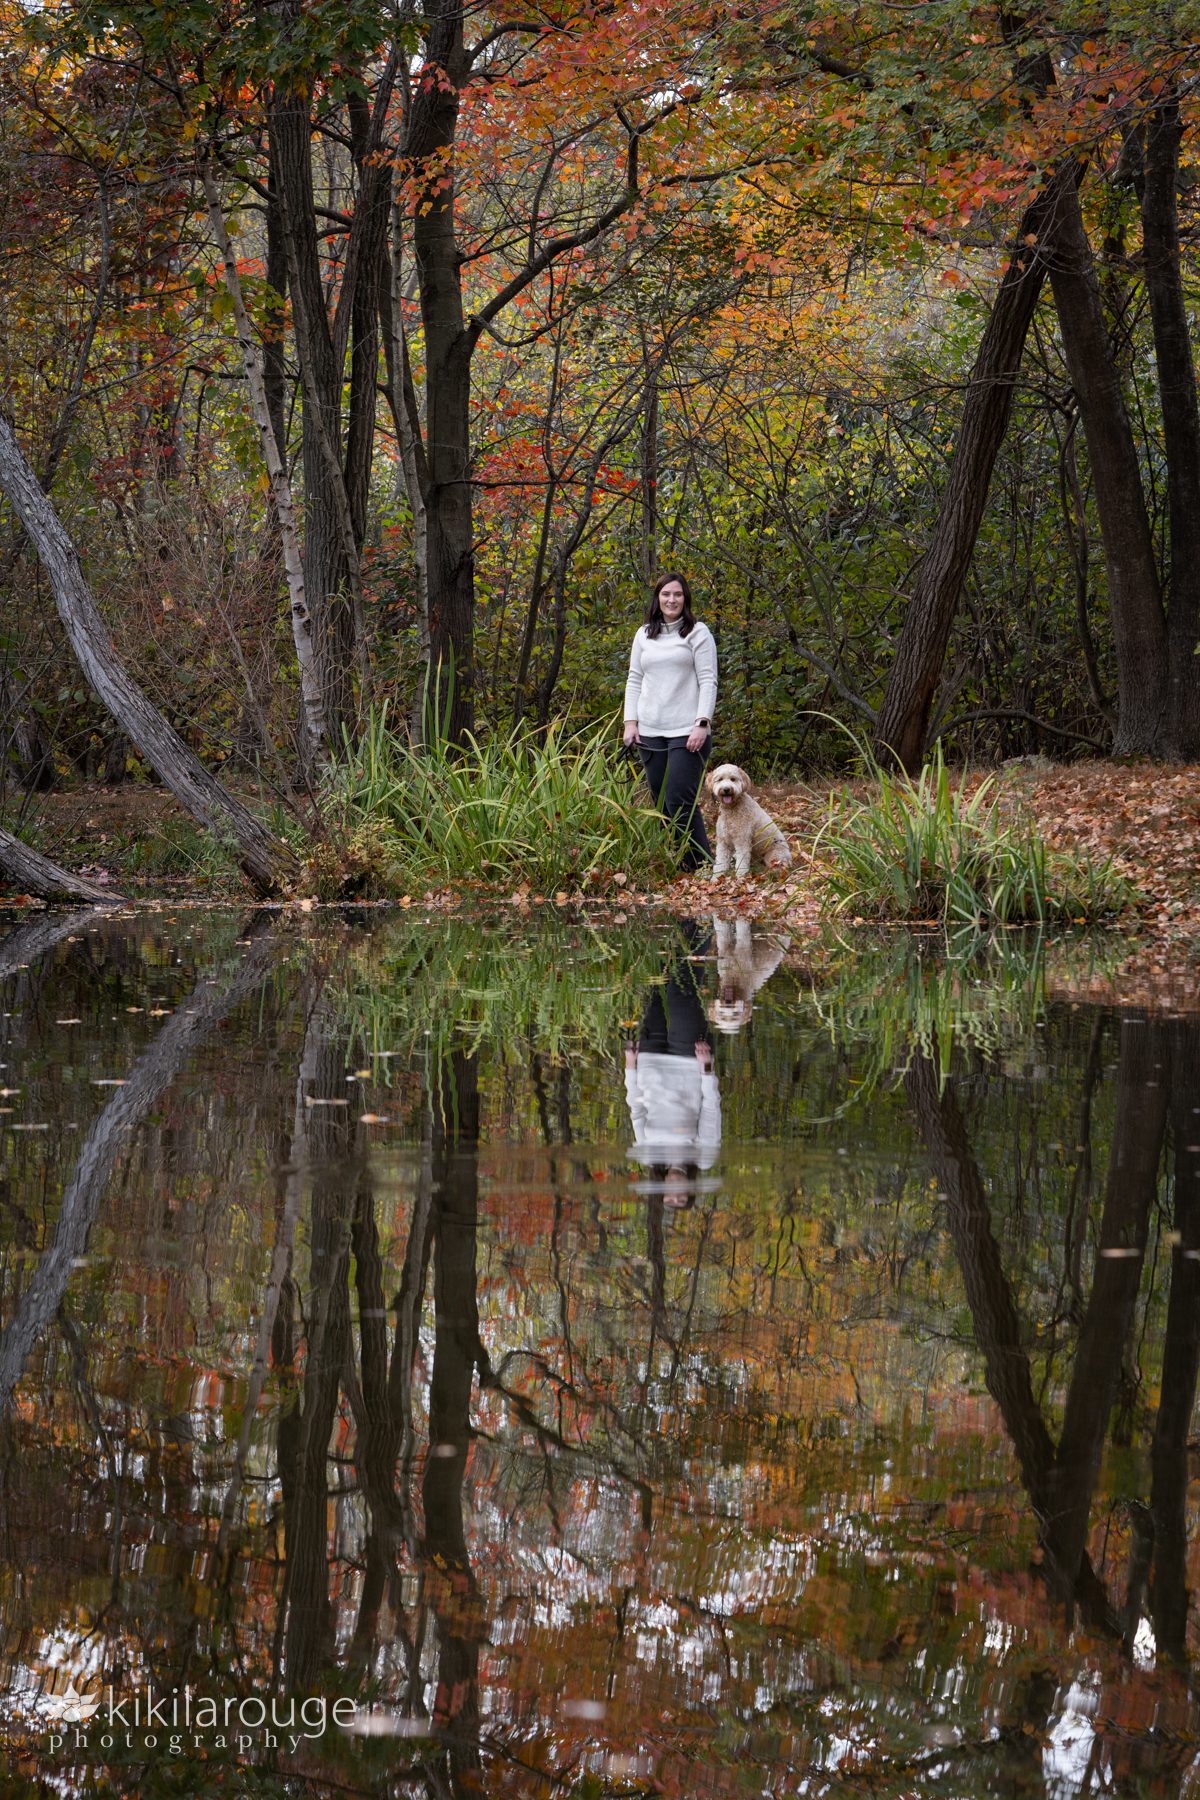 Woman and dog at water's edge on a pond reflected with the foliage and trees surrounding them